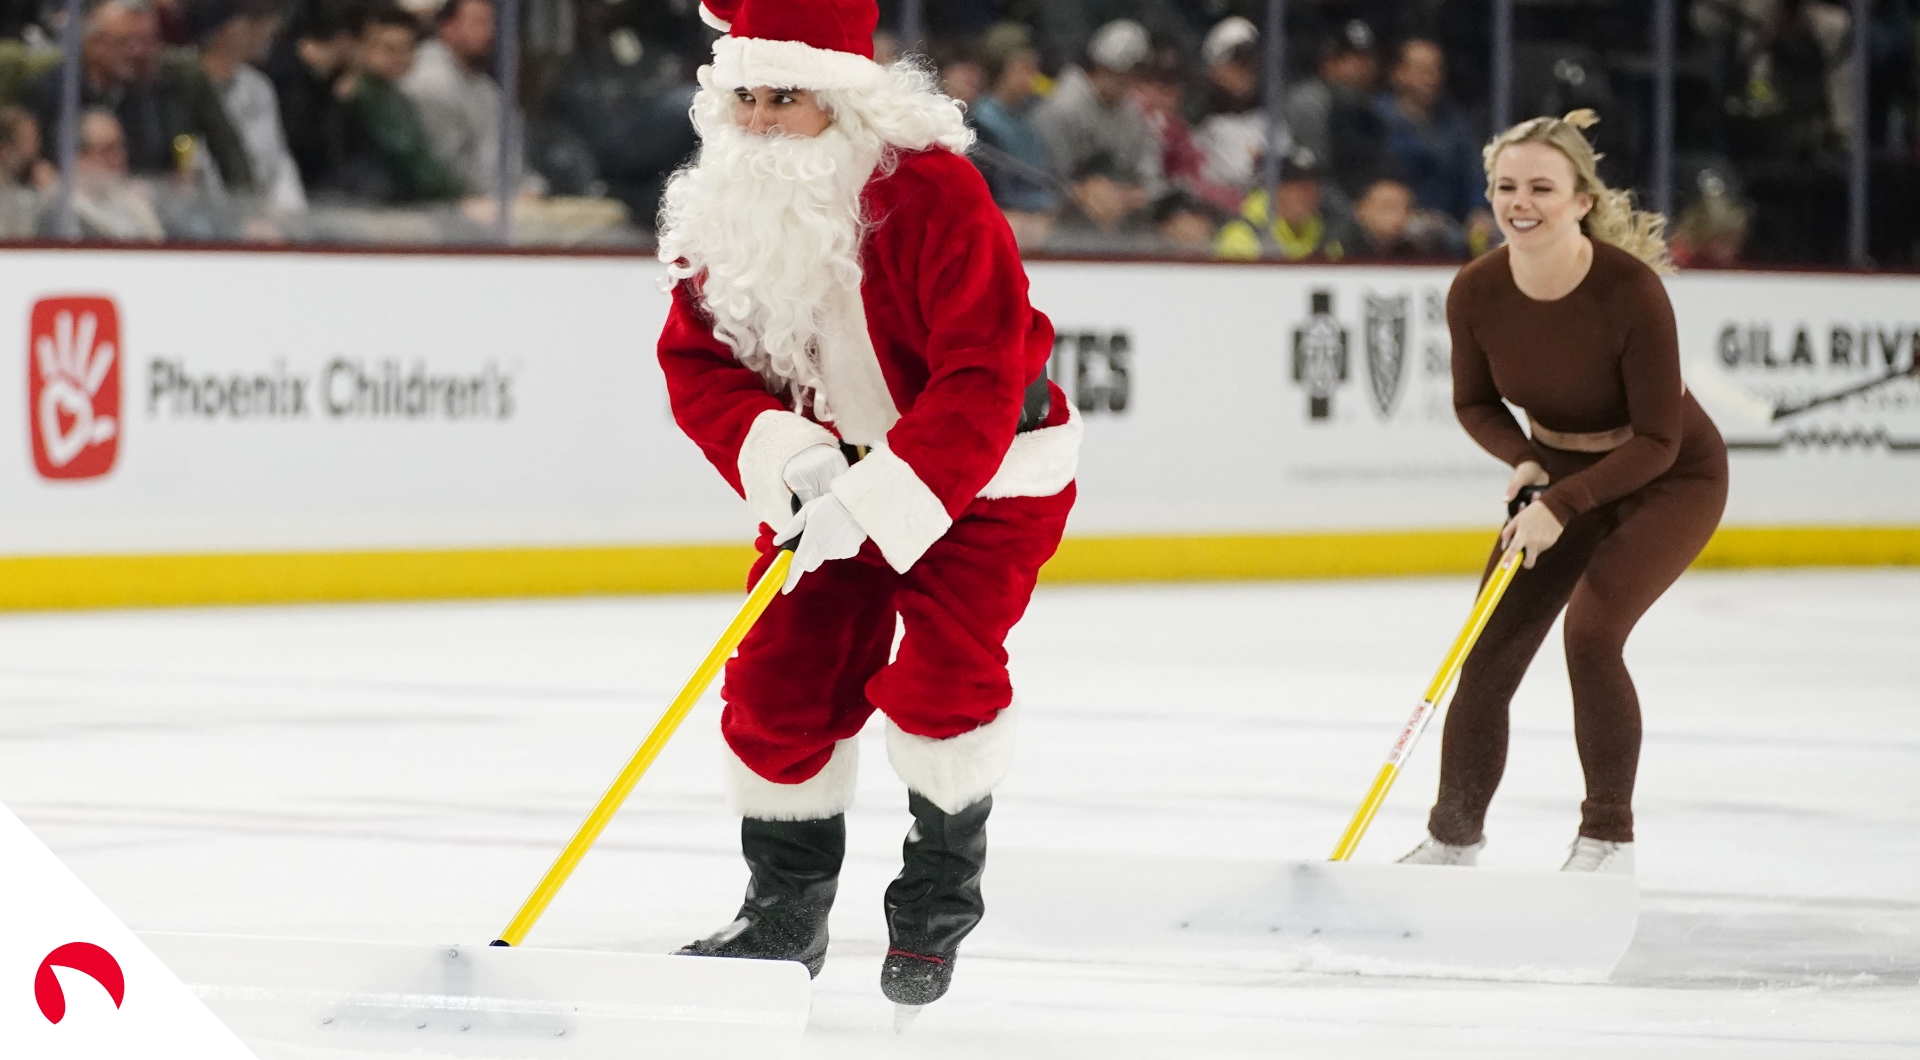 Winnipeg Jets Even Santa Claus Cheers For Christmas NHL Shirt For Fans